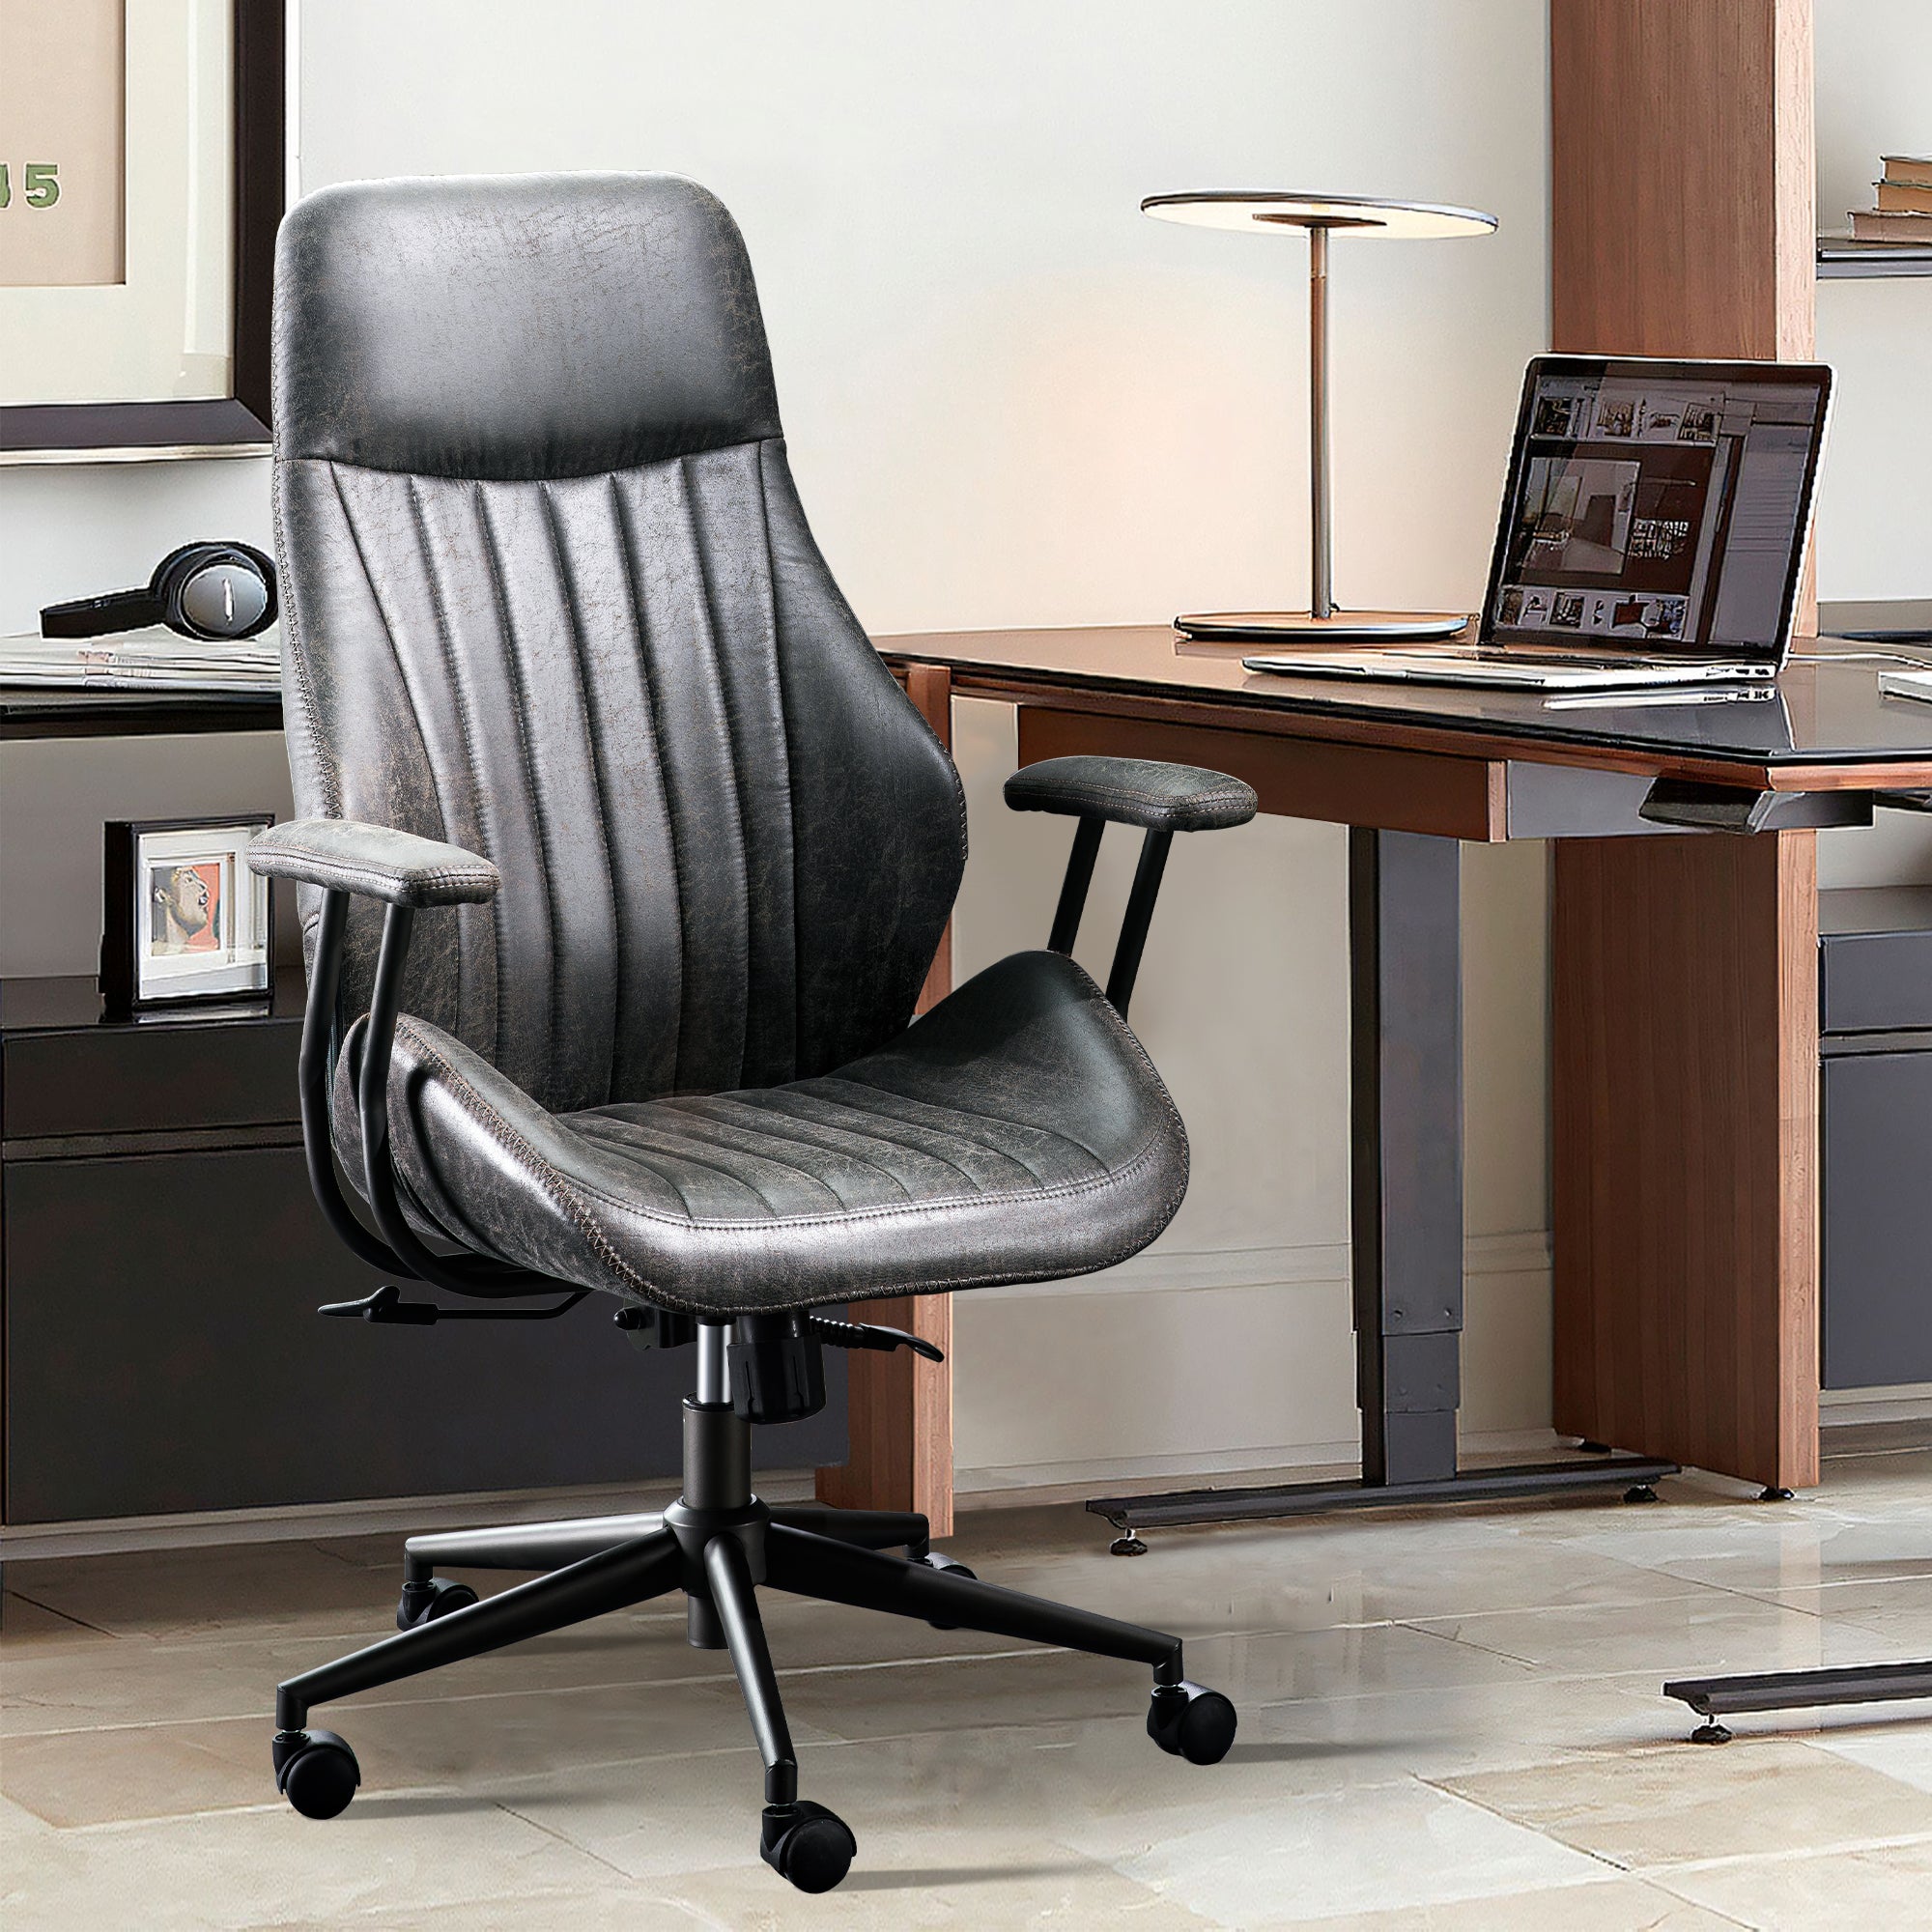 Ovios Office Chair Ergonomic High Back Suede Fabric for Executive or Home Office